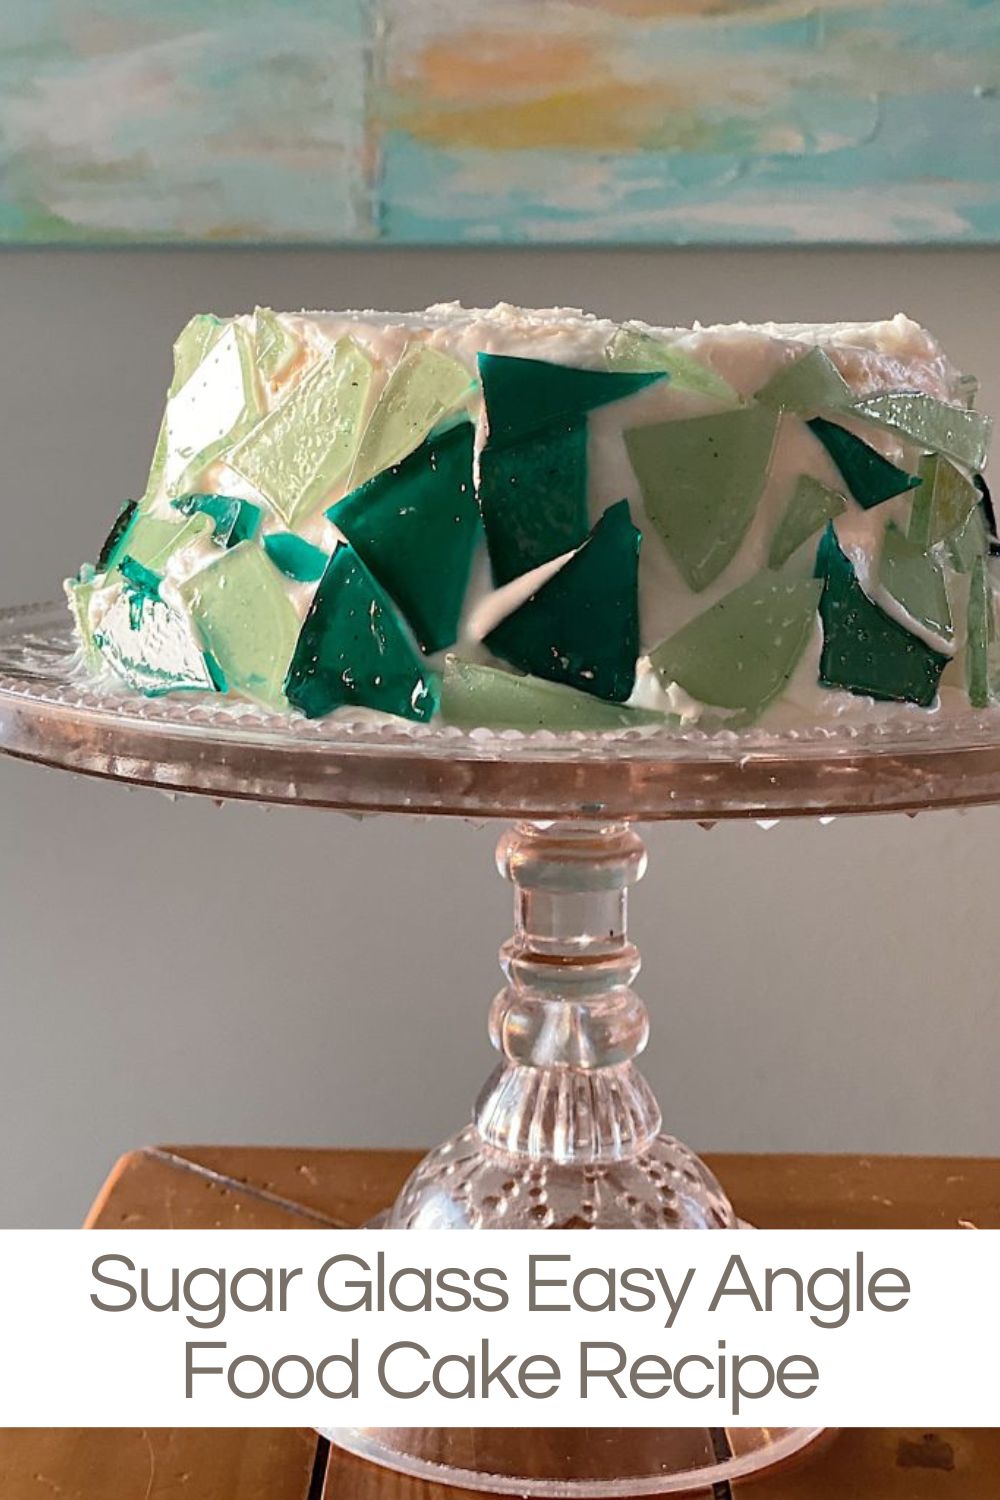 I love this sugar glass cake recipe. Would you believe I was able to combine my love for cooking and baking with my obsession with sea glass?